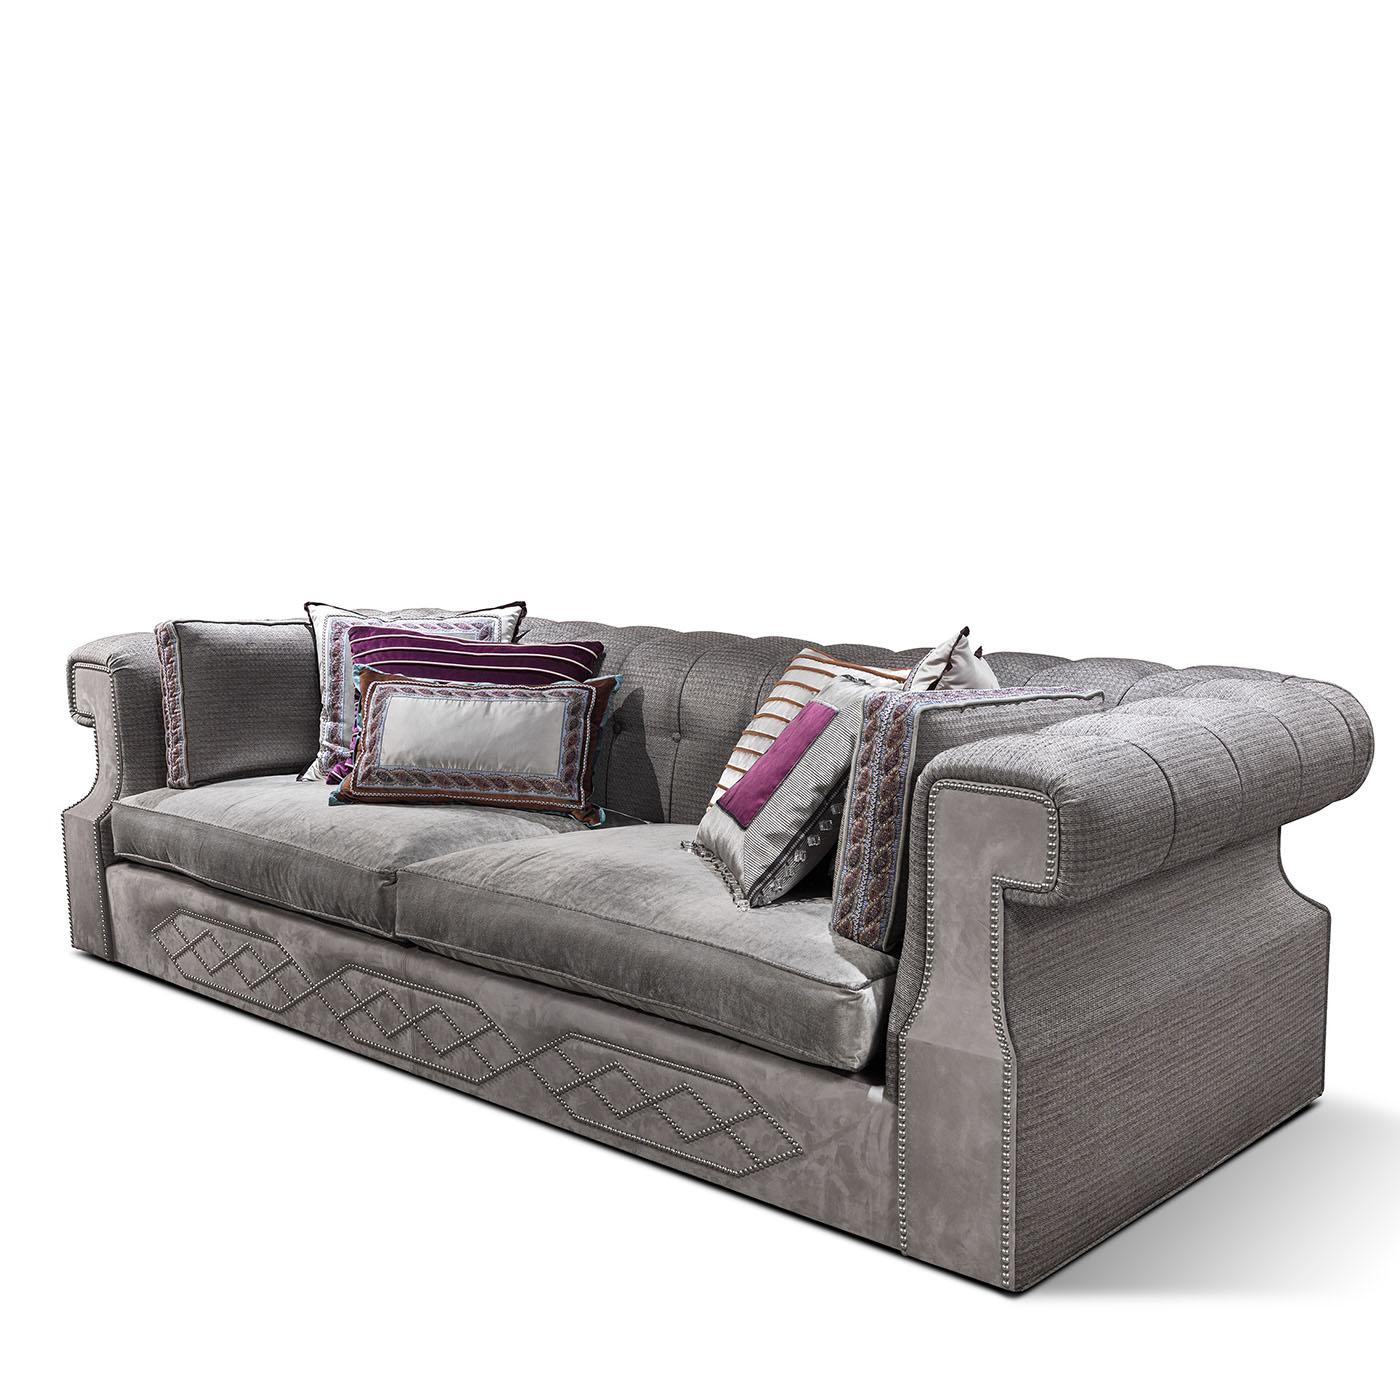 Three-seater sofa upholstered in jacquard fabric and viscose velvet. Front profile in nubuck leather with an ornamental motif of micro-studs hand applied. Pillows included as per the photo.